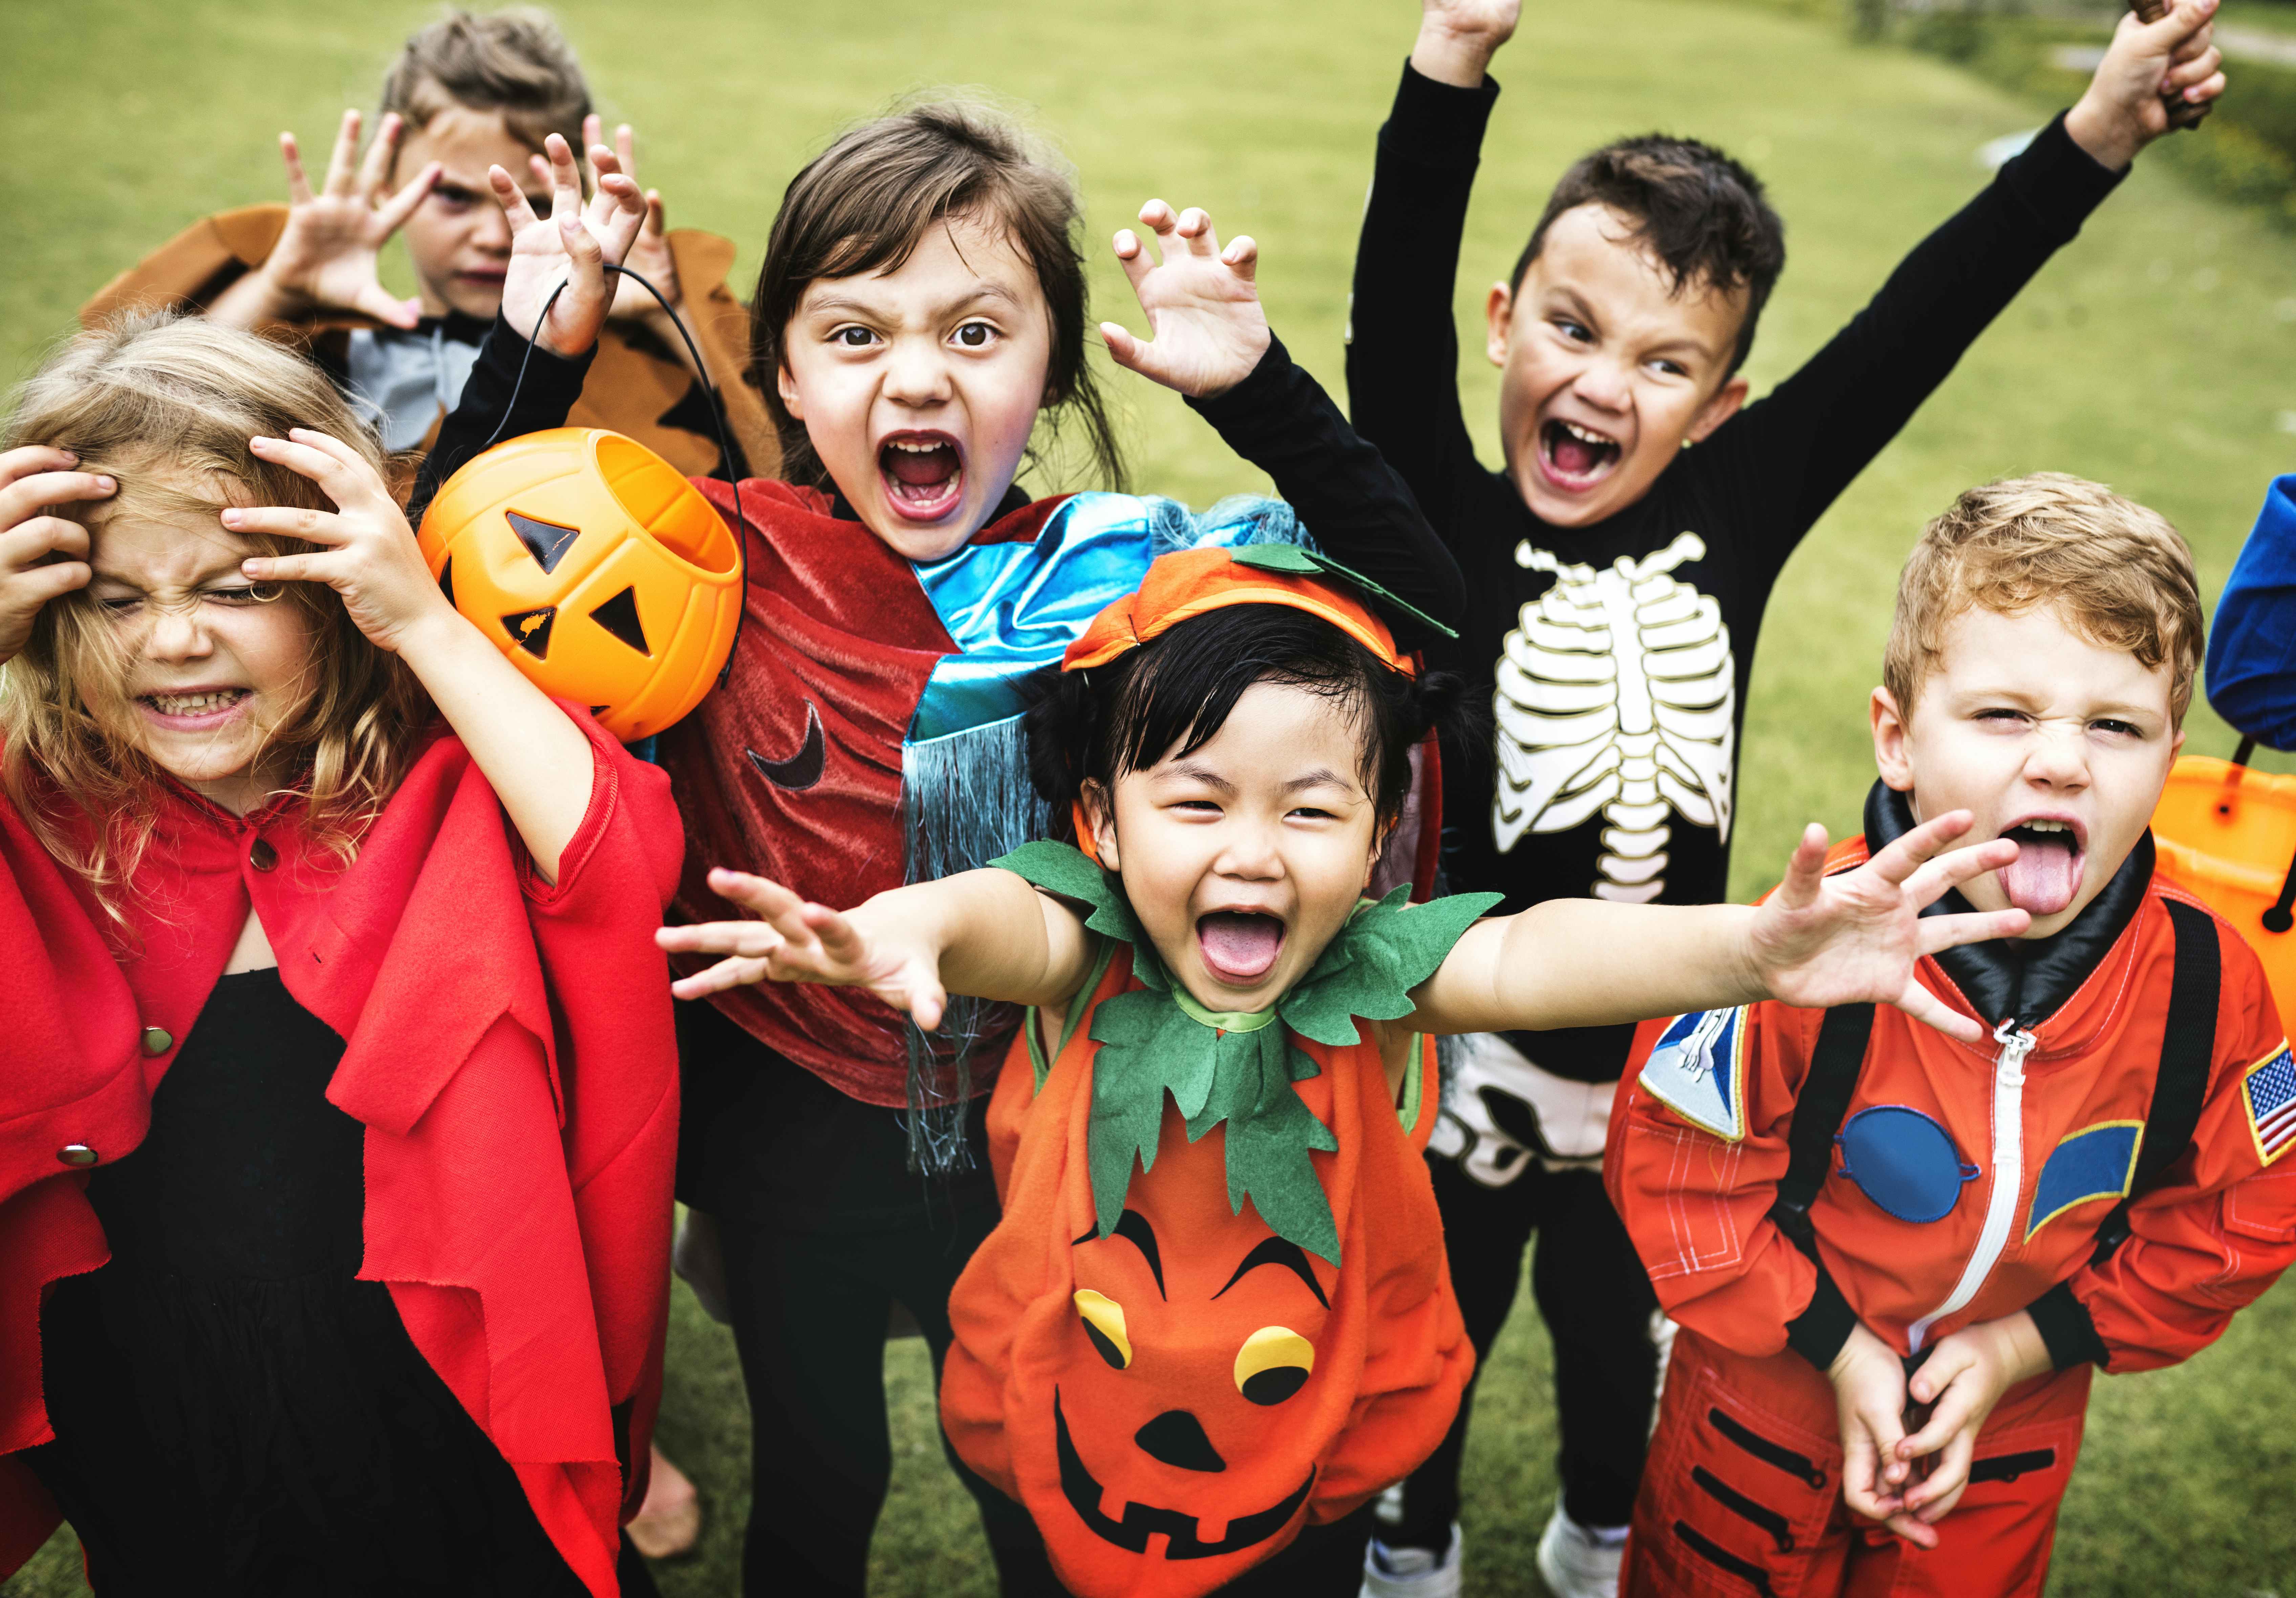 Children excitedly cheering dressed in costumes at a Halloween party.